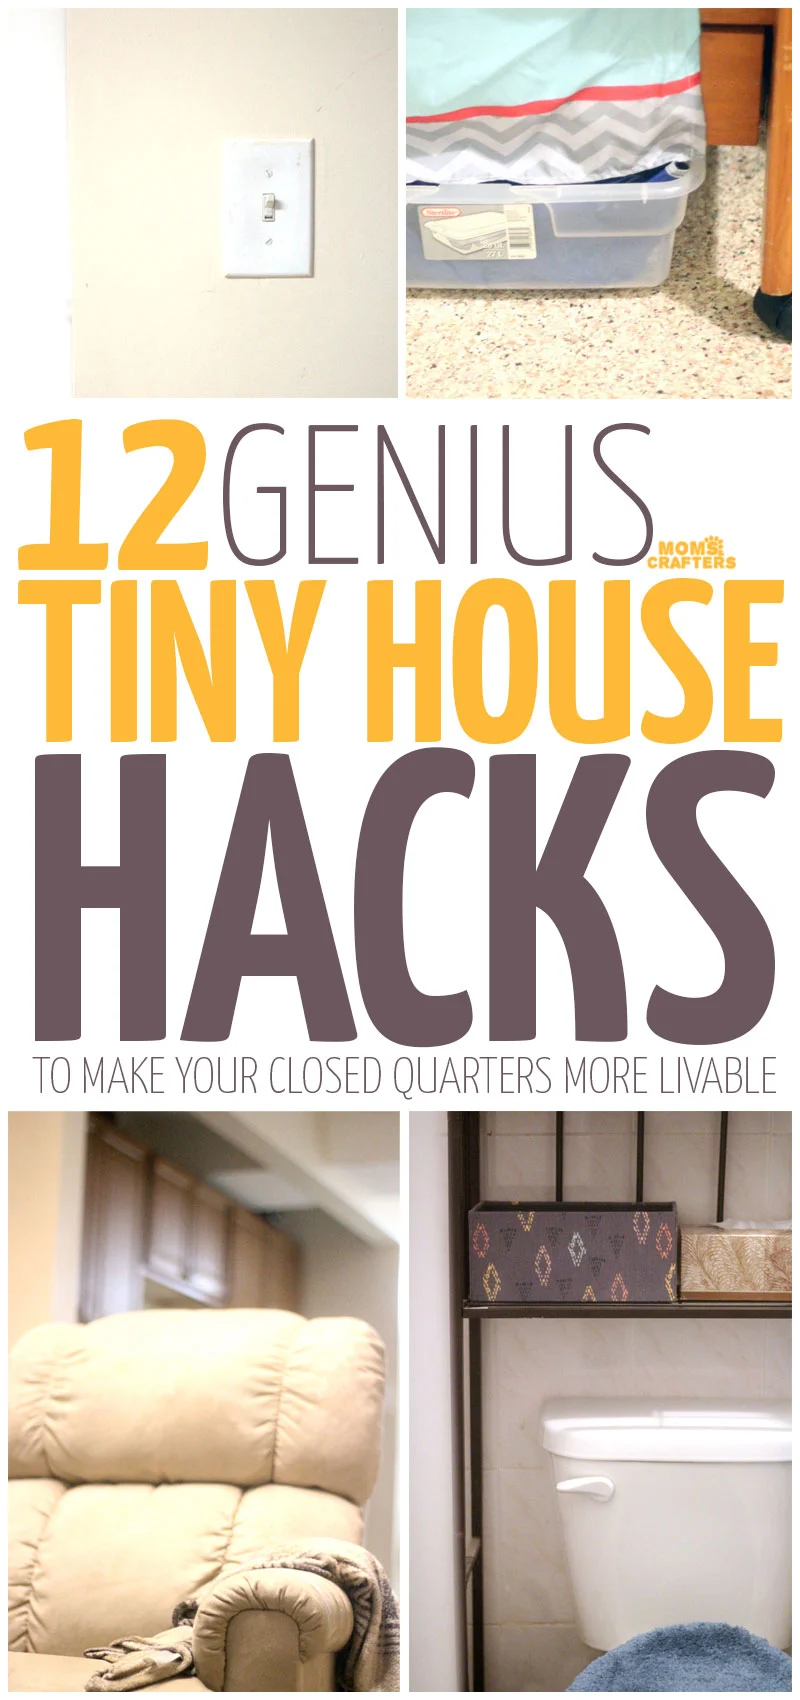 You'll love these genius tiny house hacks for keeping a small apartment organized and neat. These home organization tips also teach little DIY tricks and tools for making a small house feel bigger.